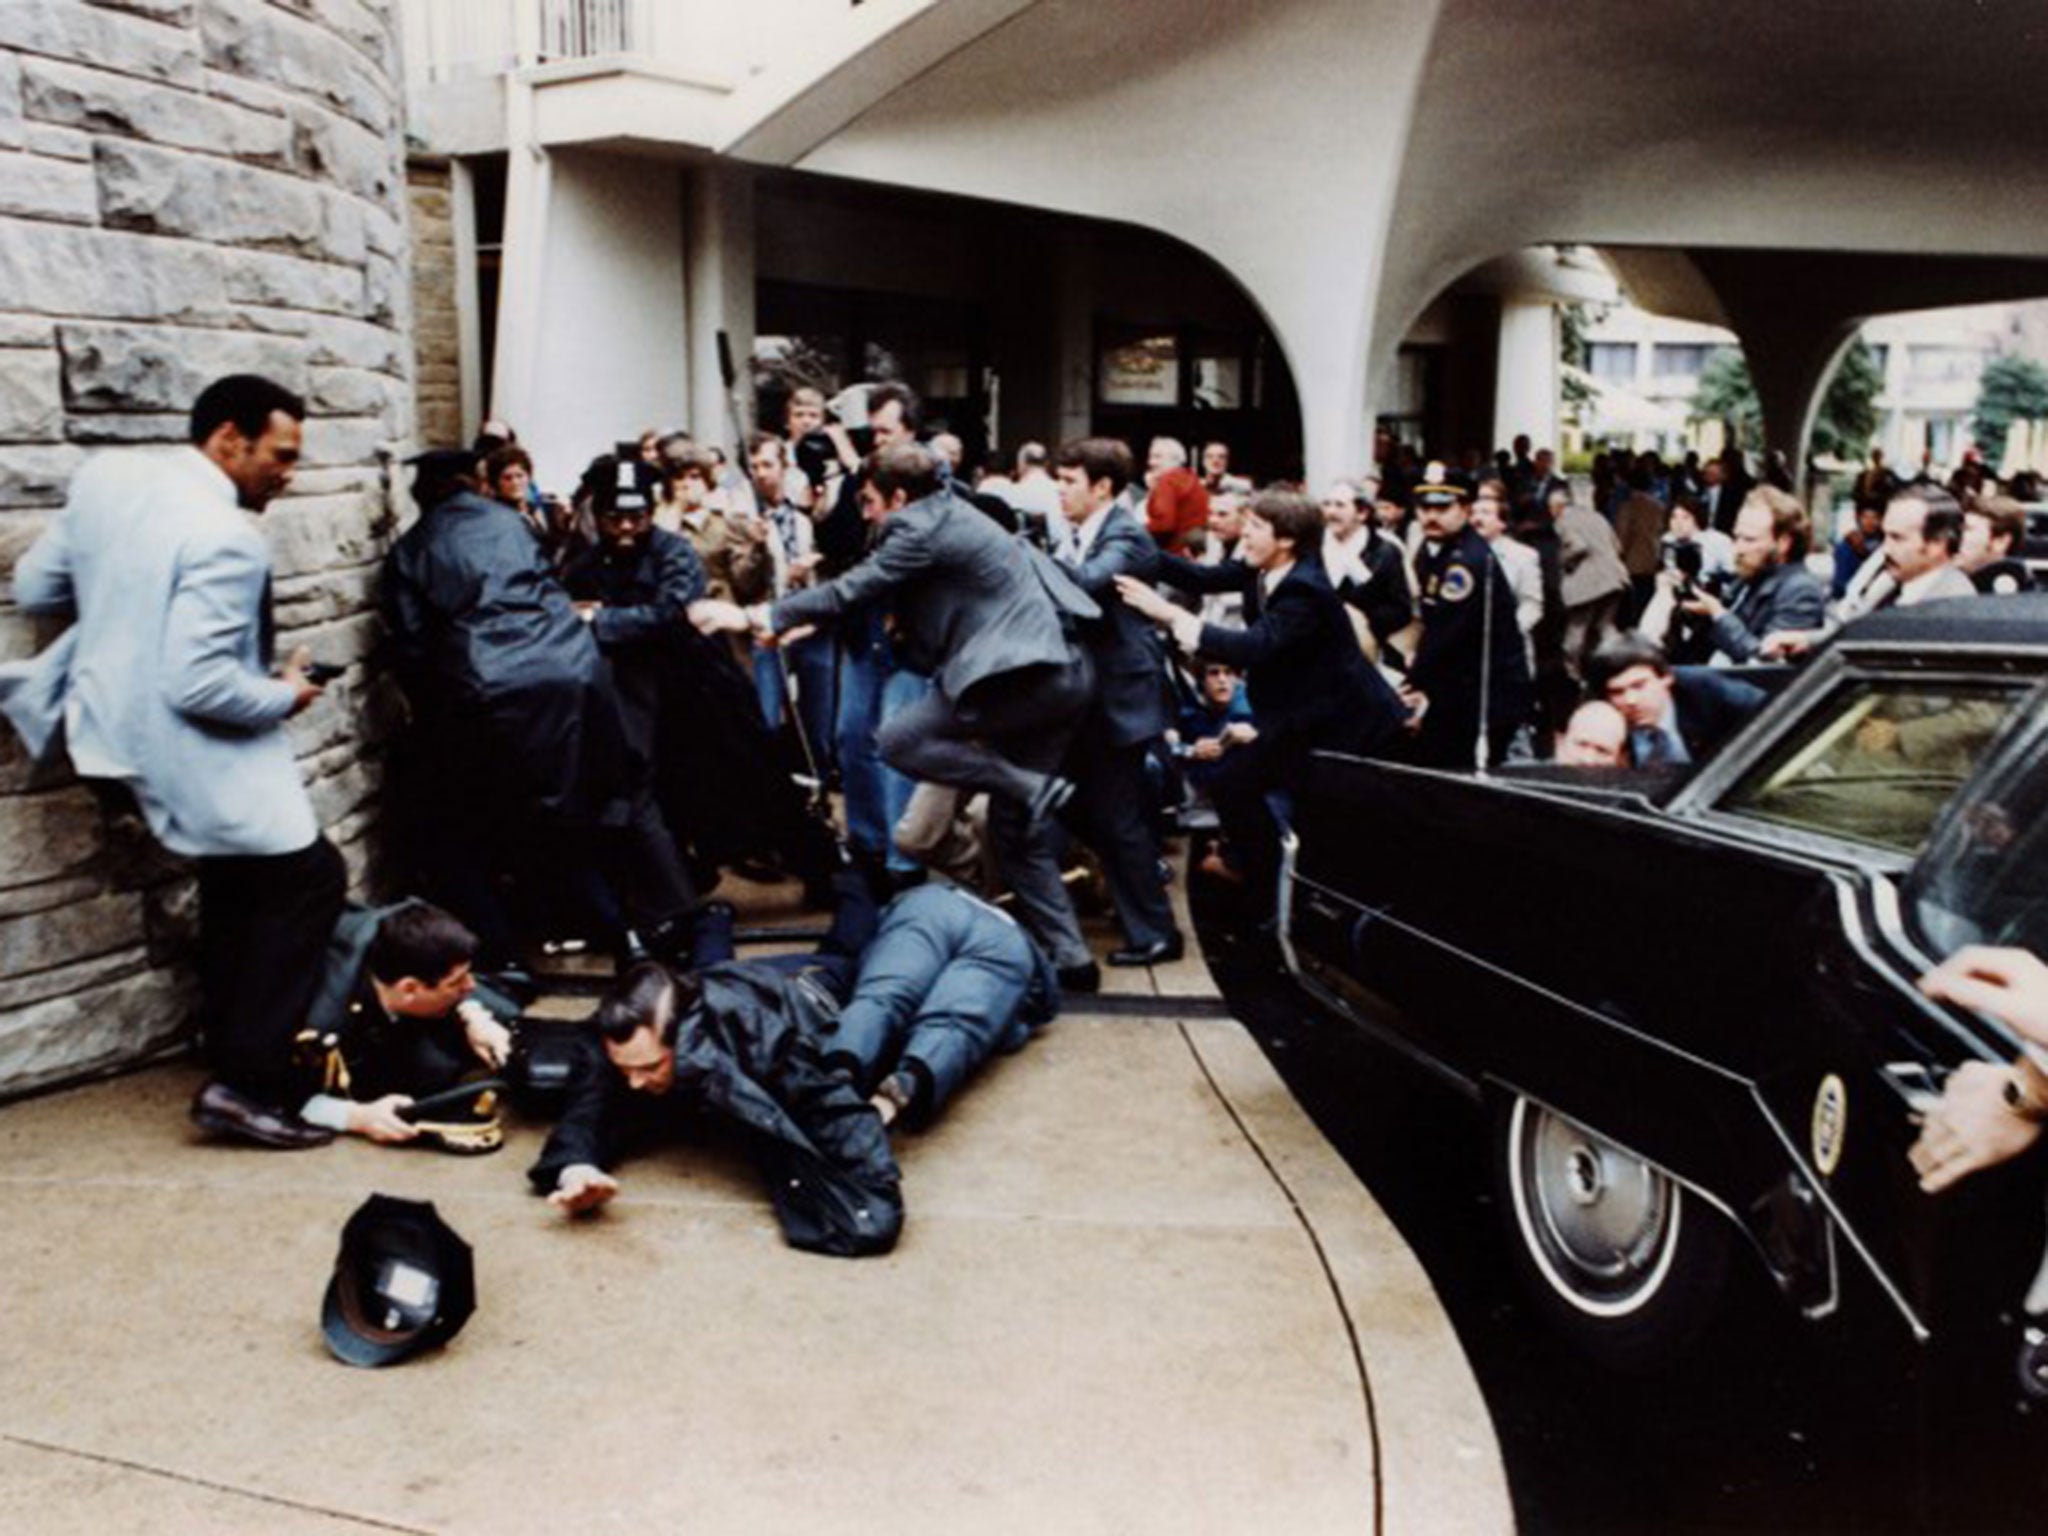 Secret service officer Tim McCarthy was shot after throwing himself in front of Ronald Reagan to protect the president from John Hinckley in 1981